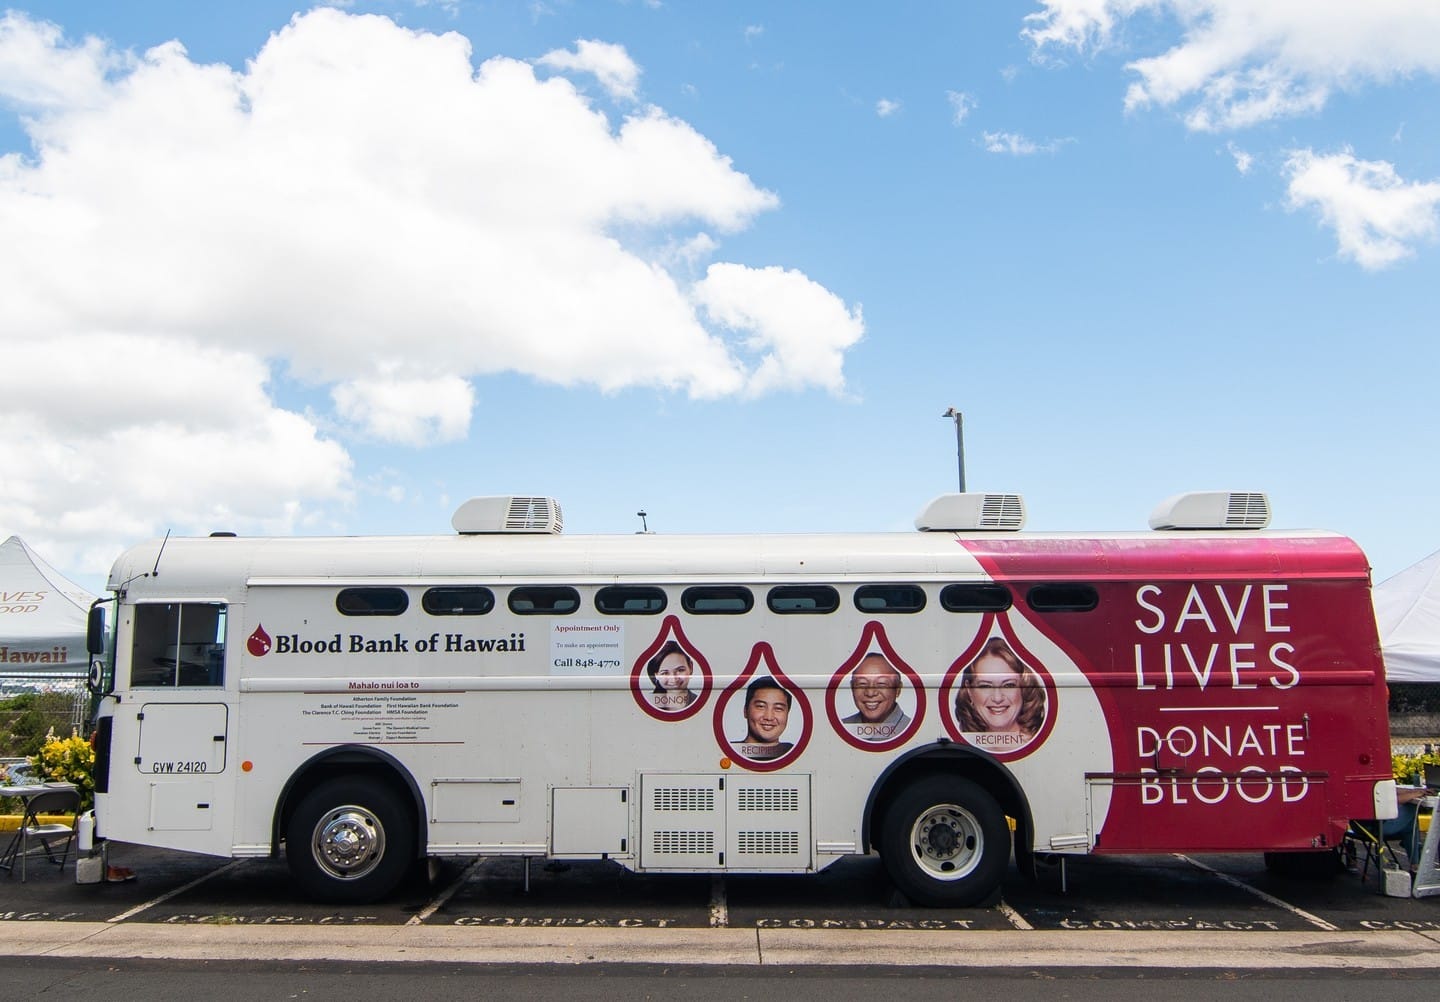 We are proud to partner with @bloodbankhawaii this holiday season for a blood drive at Ward Village. We invite you to give back by donating blood on Saturday, December 10 from 7am - 1pm at 250 Ward Court. Sign up at the link in our bio.